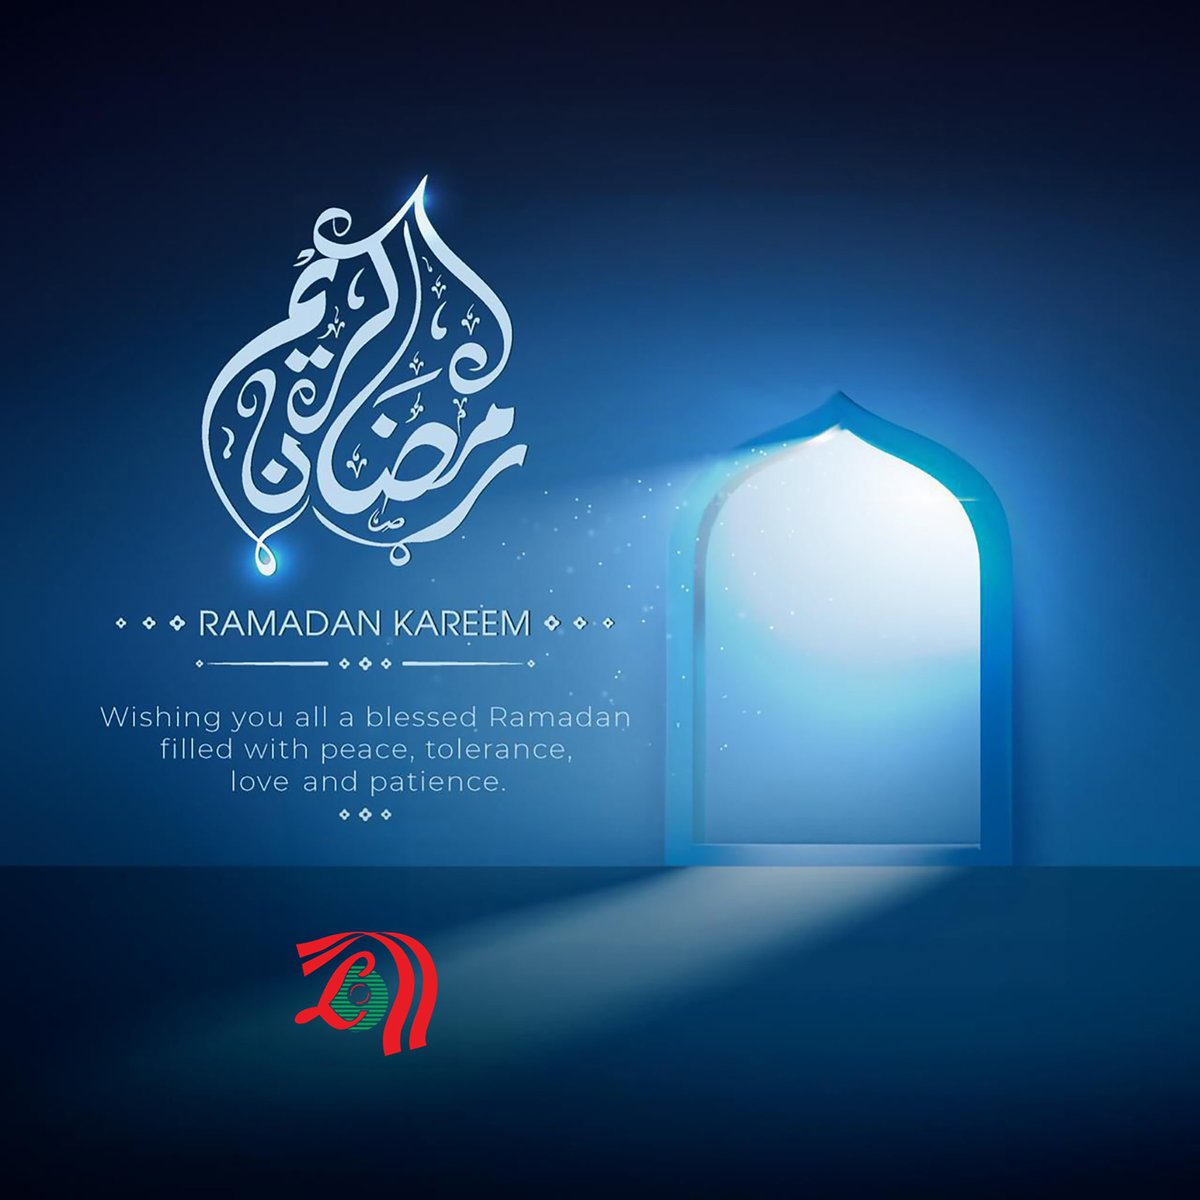 Wishing you all a blessed Ramadan filled with peace, tolerance, love and patience. #RamadanKareem